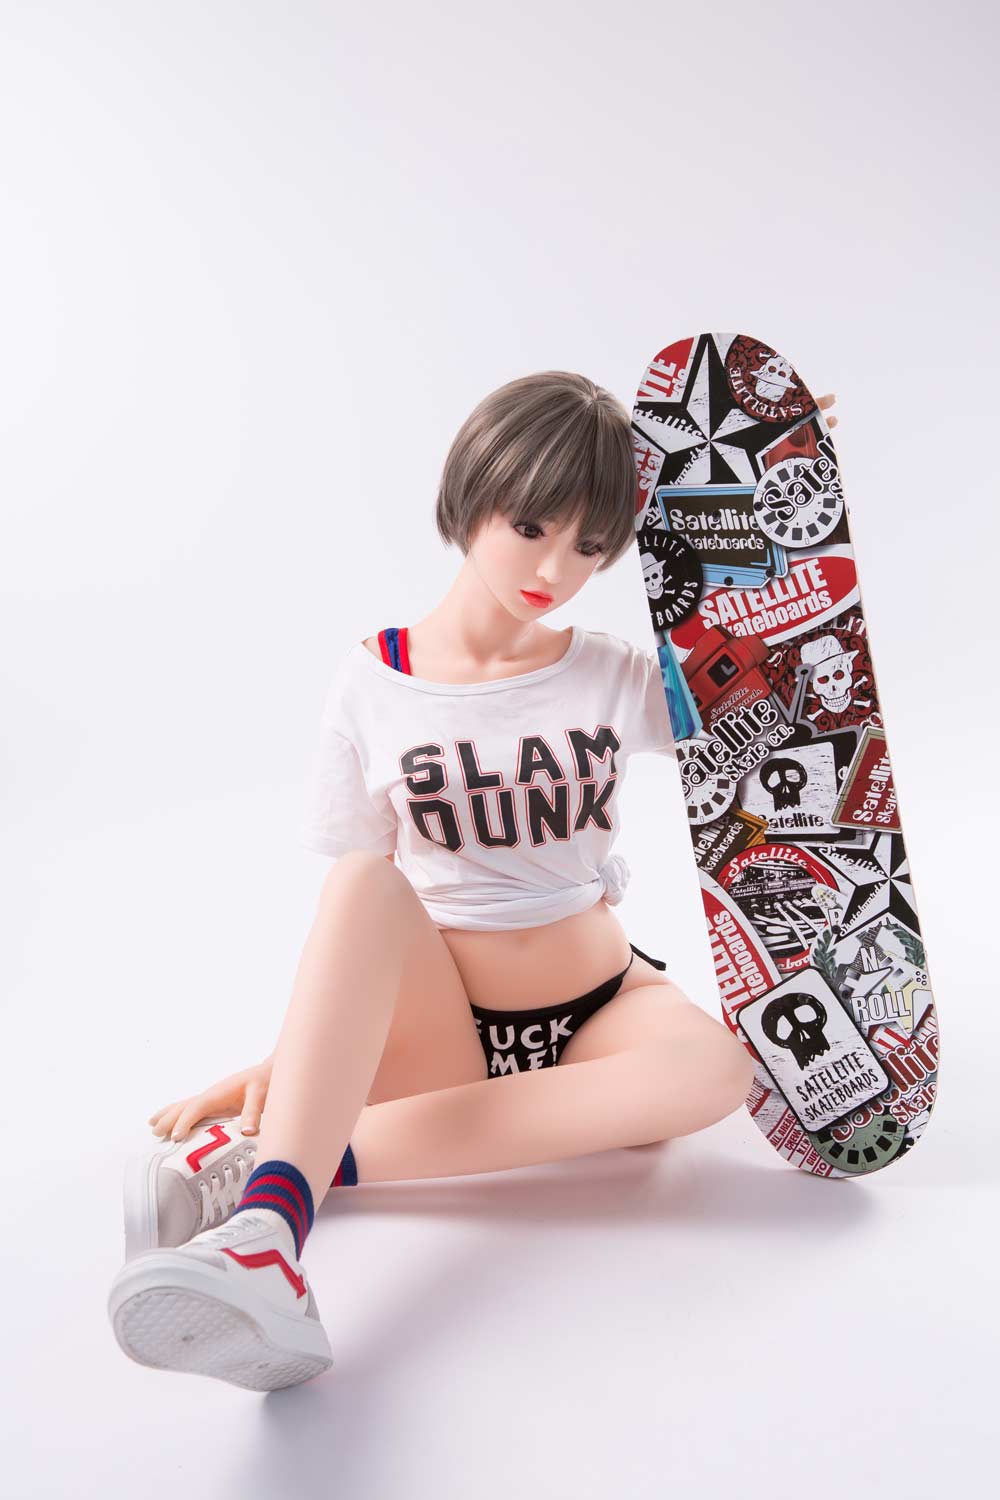 A mini sex doll sitting on the ground holding a skateboard